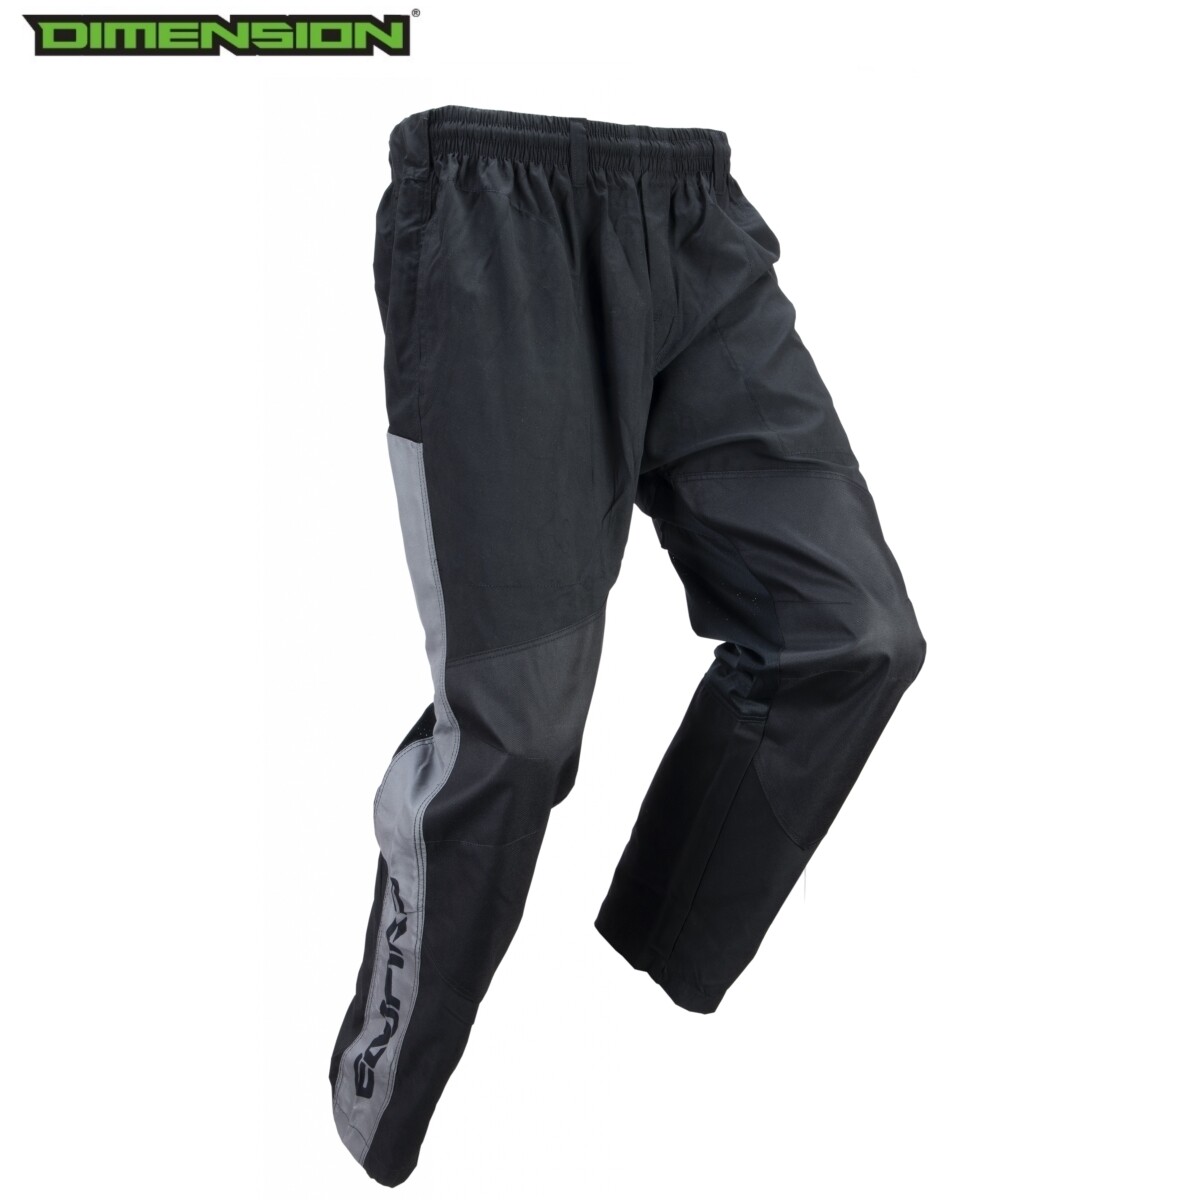 Empire Grind Pants - Black/Grey - Small